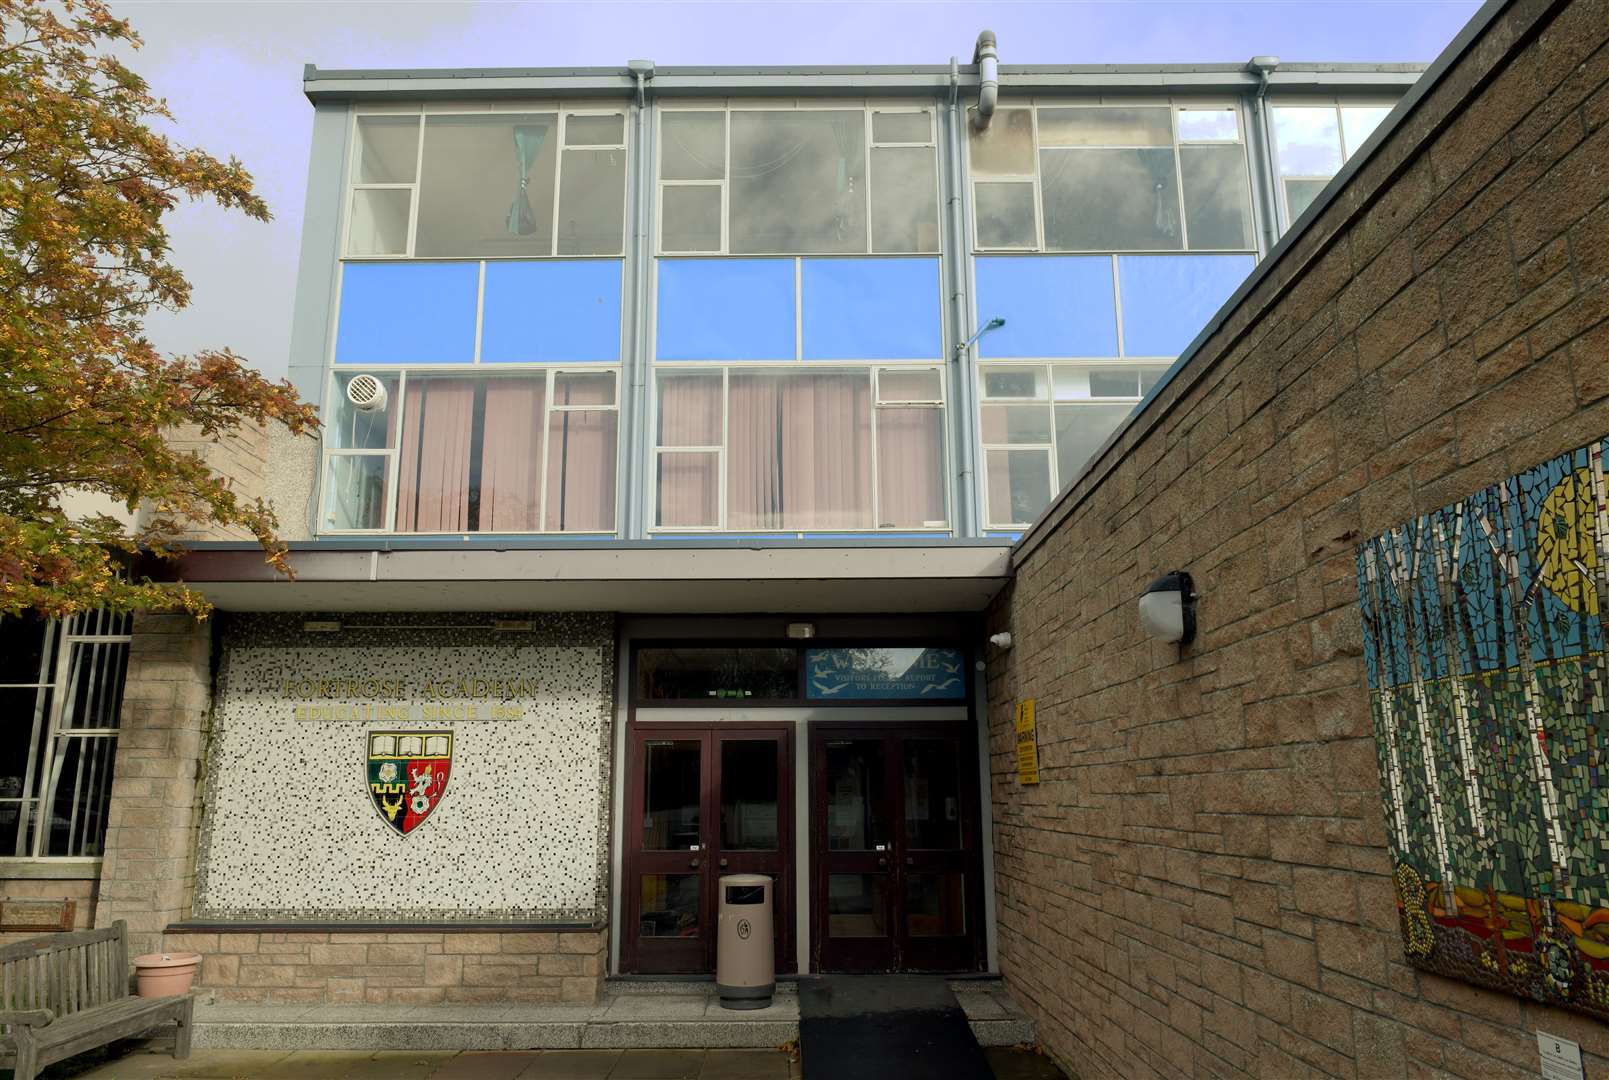 Police inquiries are continuing after Fortrose Academy was evacuated earlier today.